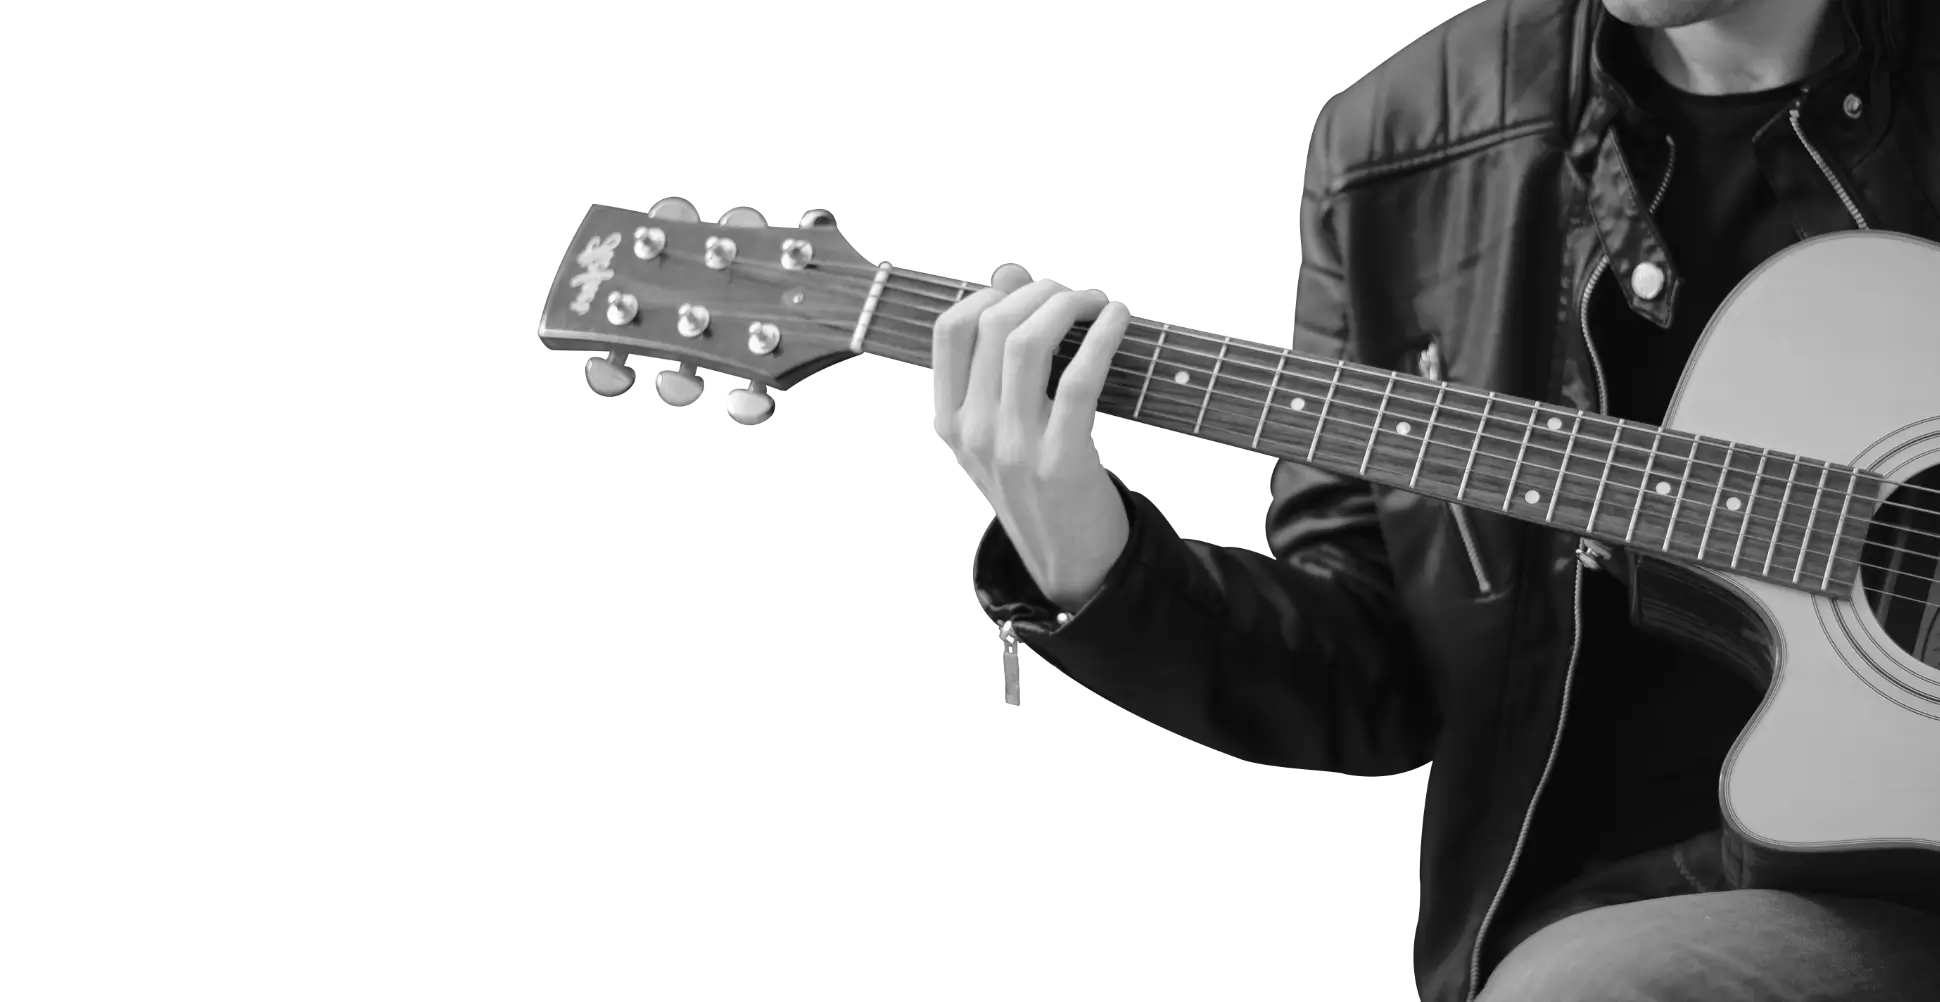 In black and white, partially a person wearing a leather jacket, black shirt and jeans, sitting down and playing a guitar.